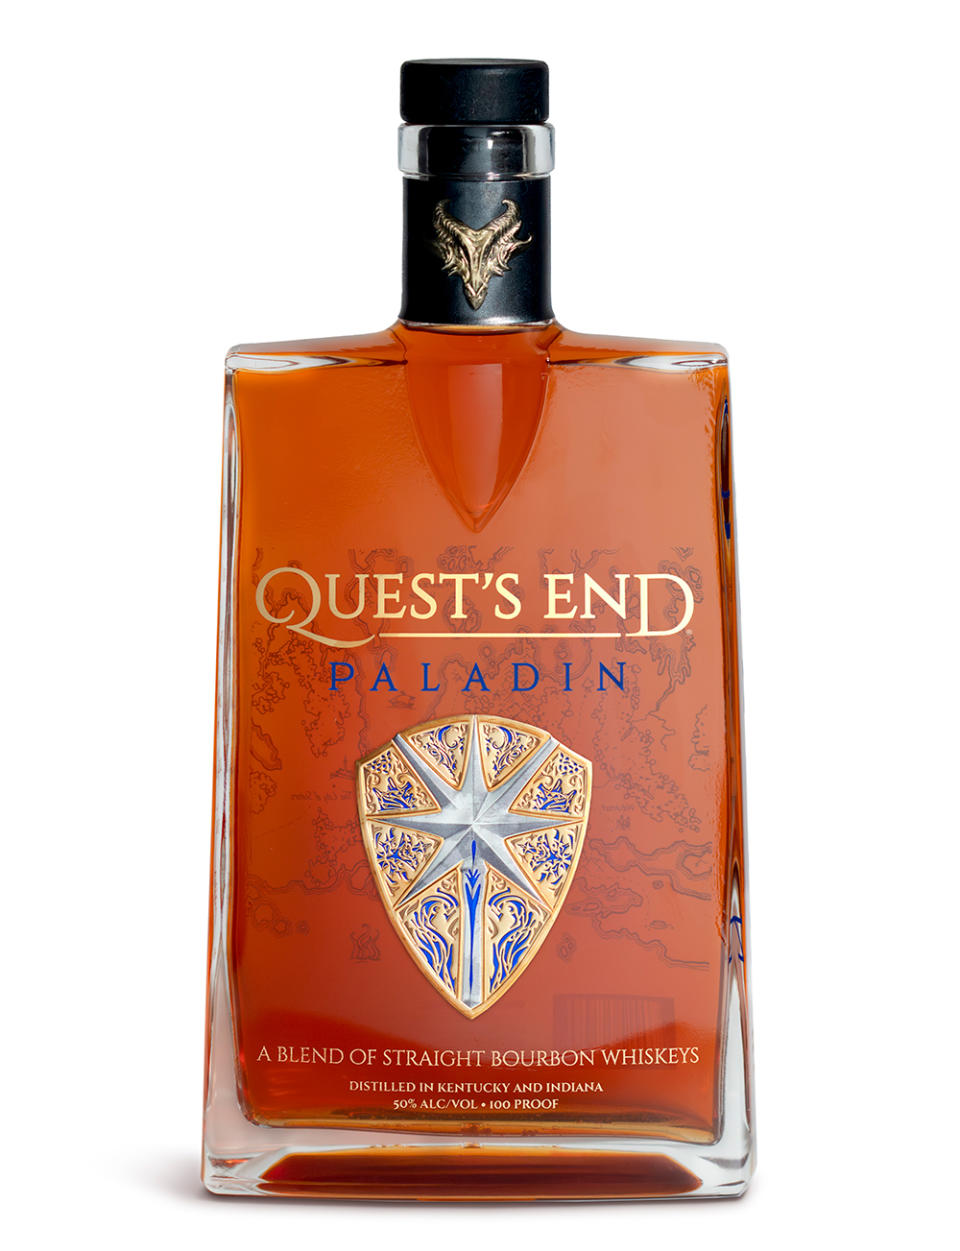 Quest's End Paladin whiskey